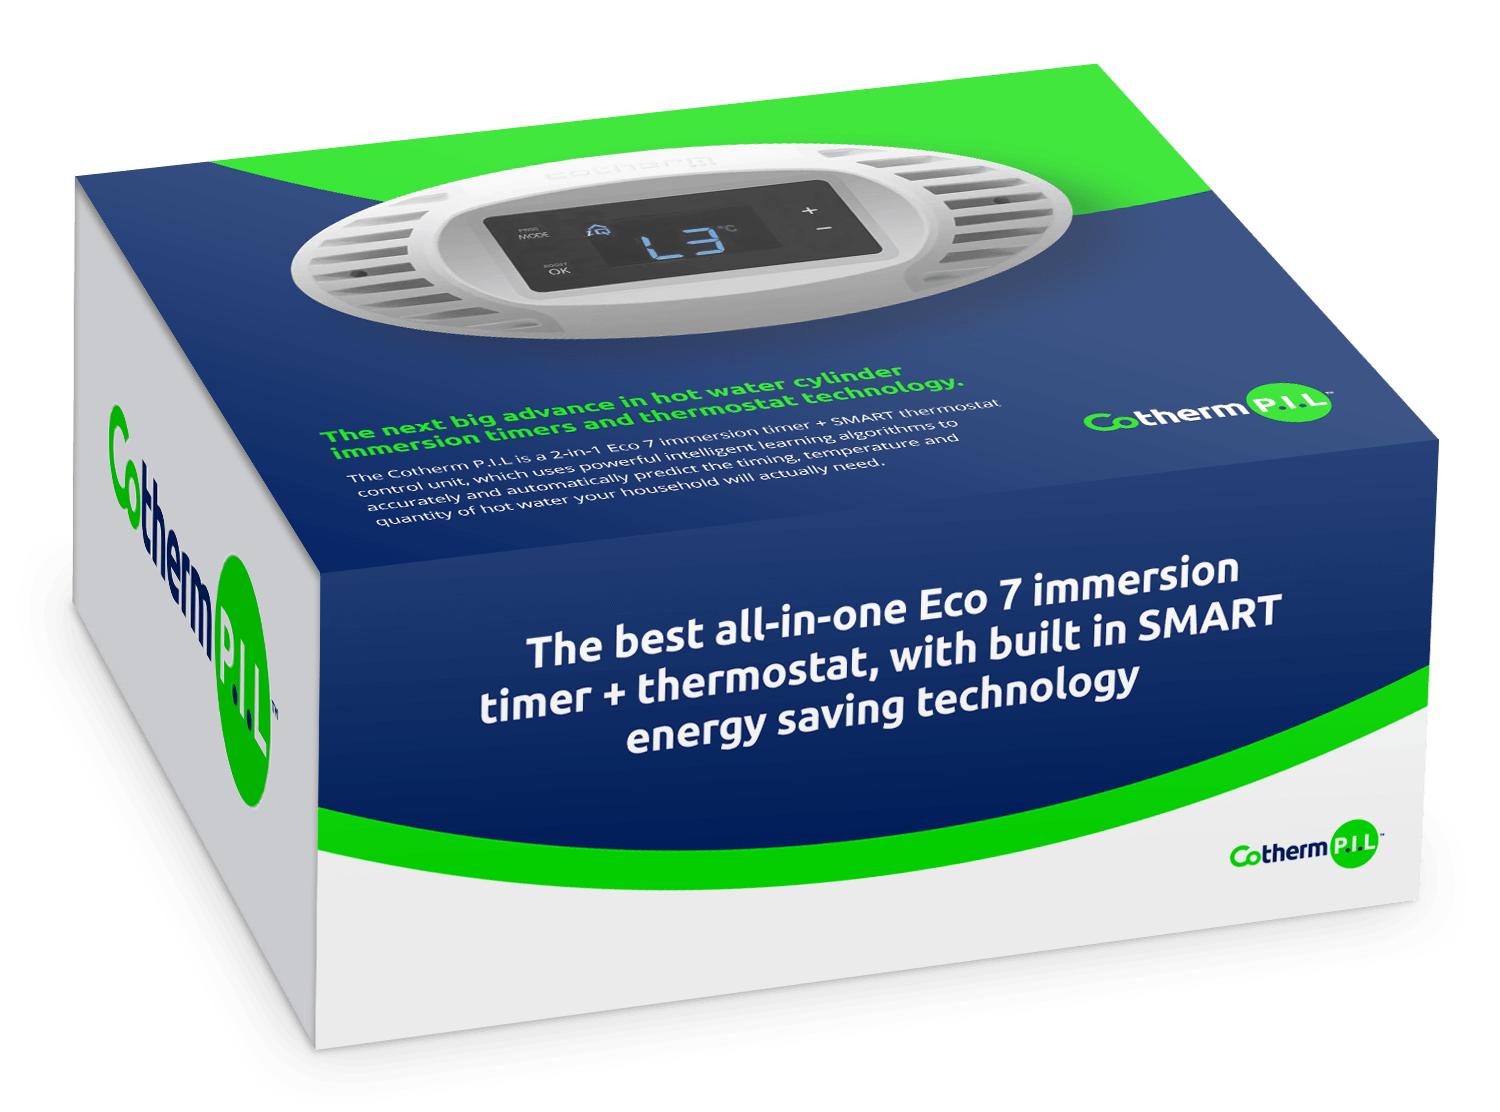 Cotherm PIL | THE ALL-IN-ONE ECO 7 IMMERSION TIMER + THERMOSTAT packaging